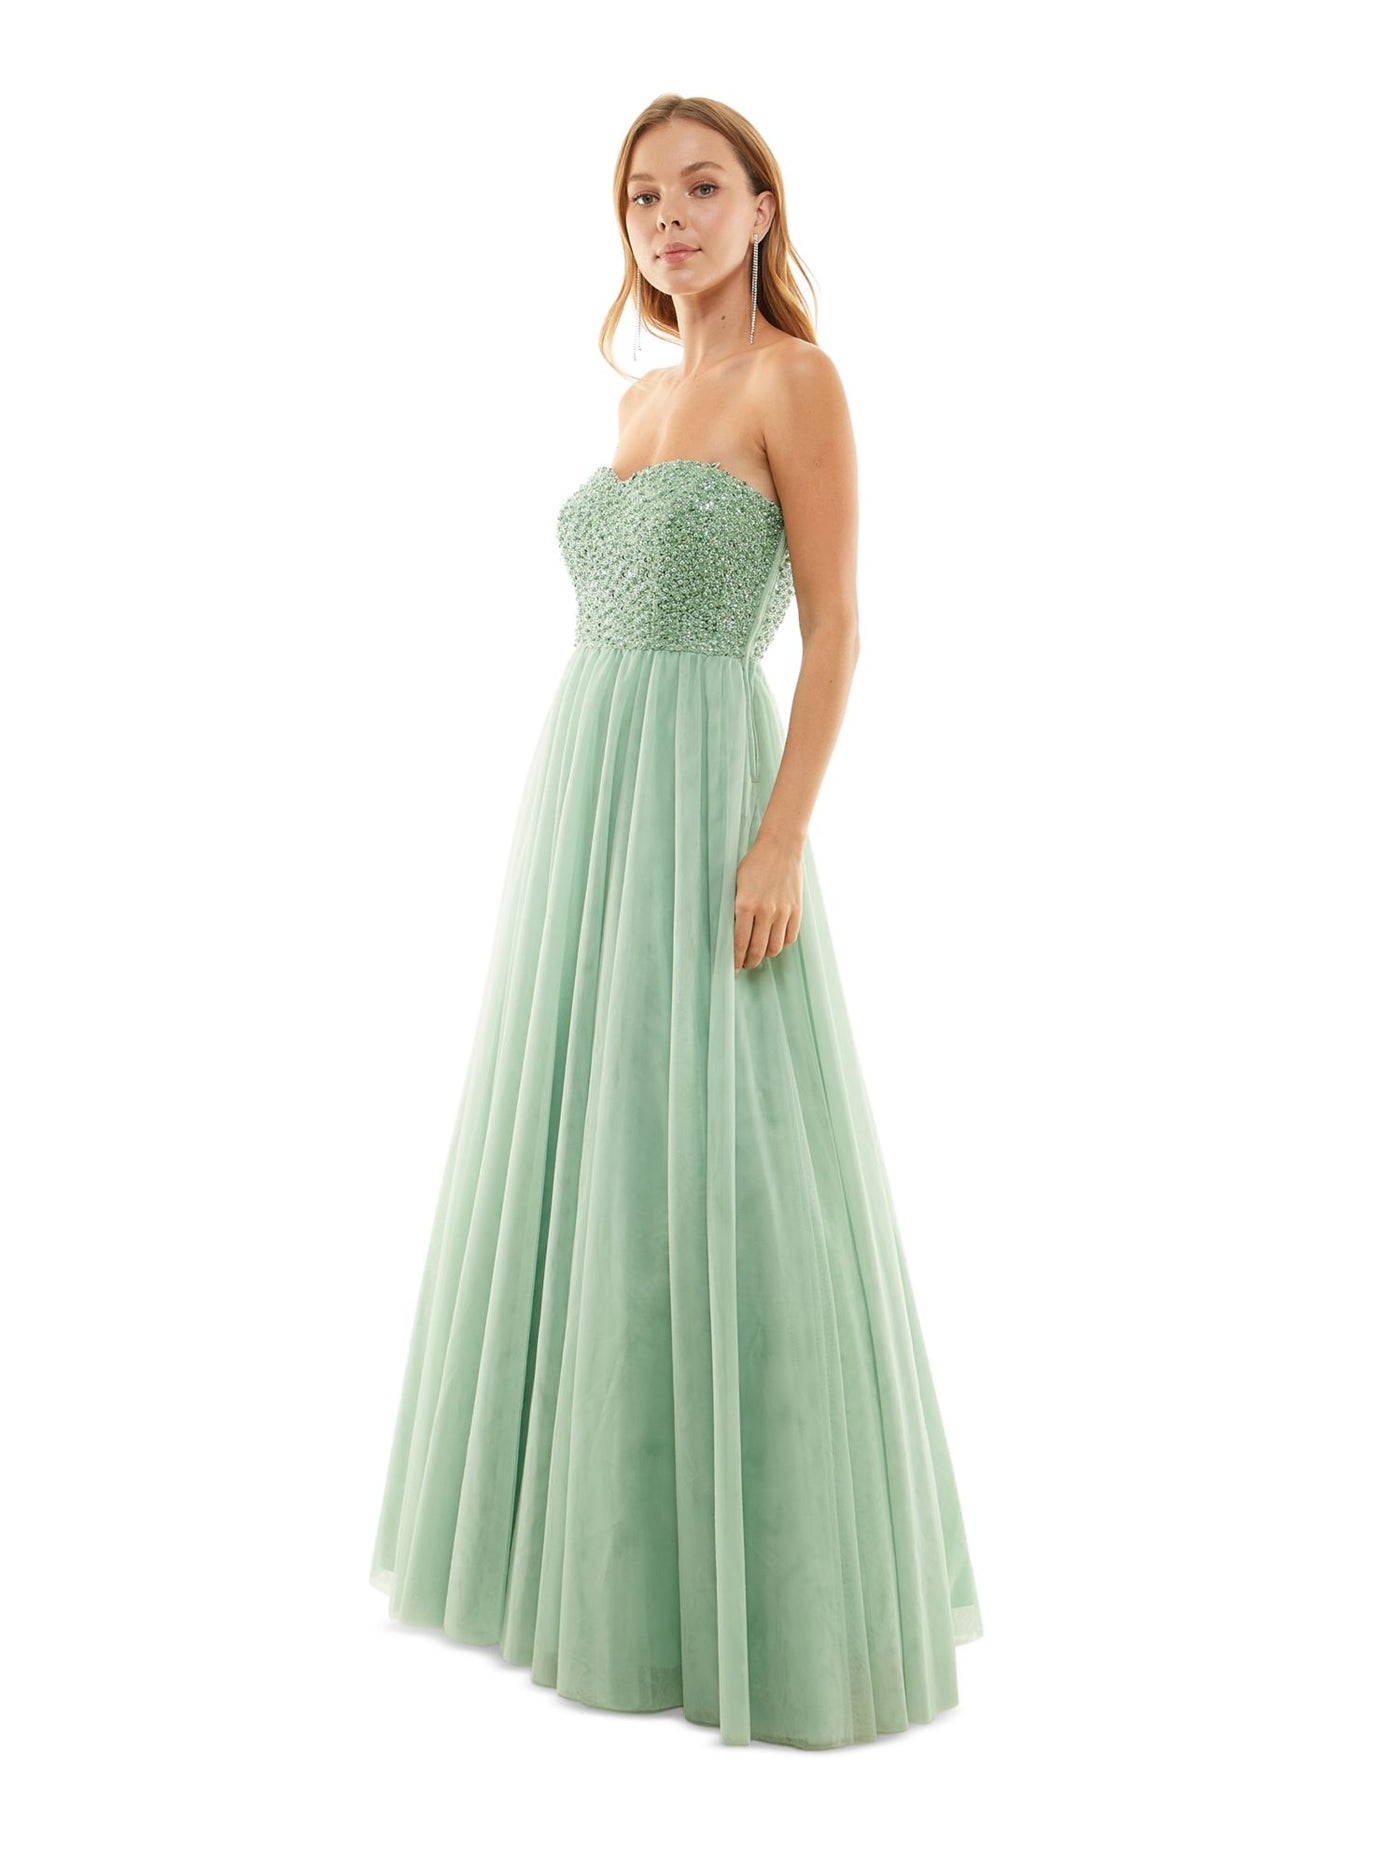 SAY YES TO THE PROM Womens Green Embellished Zippered Padded Lined Tulle Mesh Sleeveless Sweetheart Neckline Full-Length Party Gown Dress Juniors 5